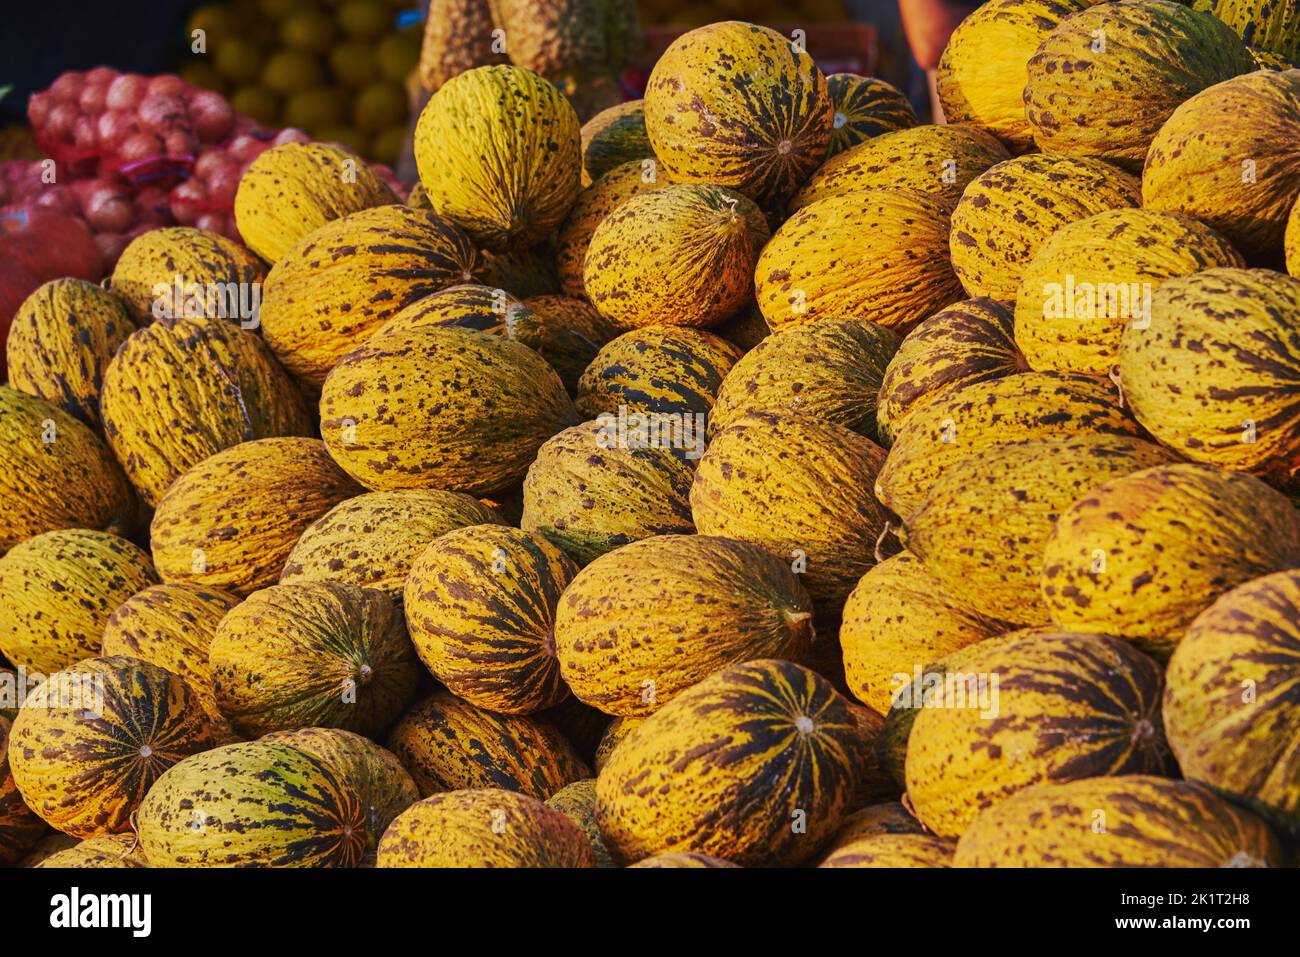 Melons piled in a heap on the market. The fruits are illuminated by the evening setting sun. Stock Photo